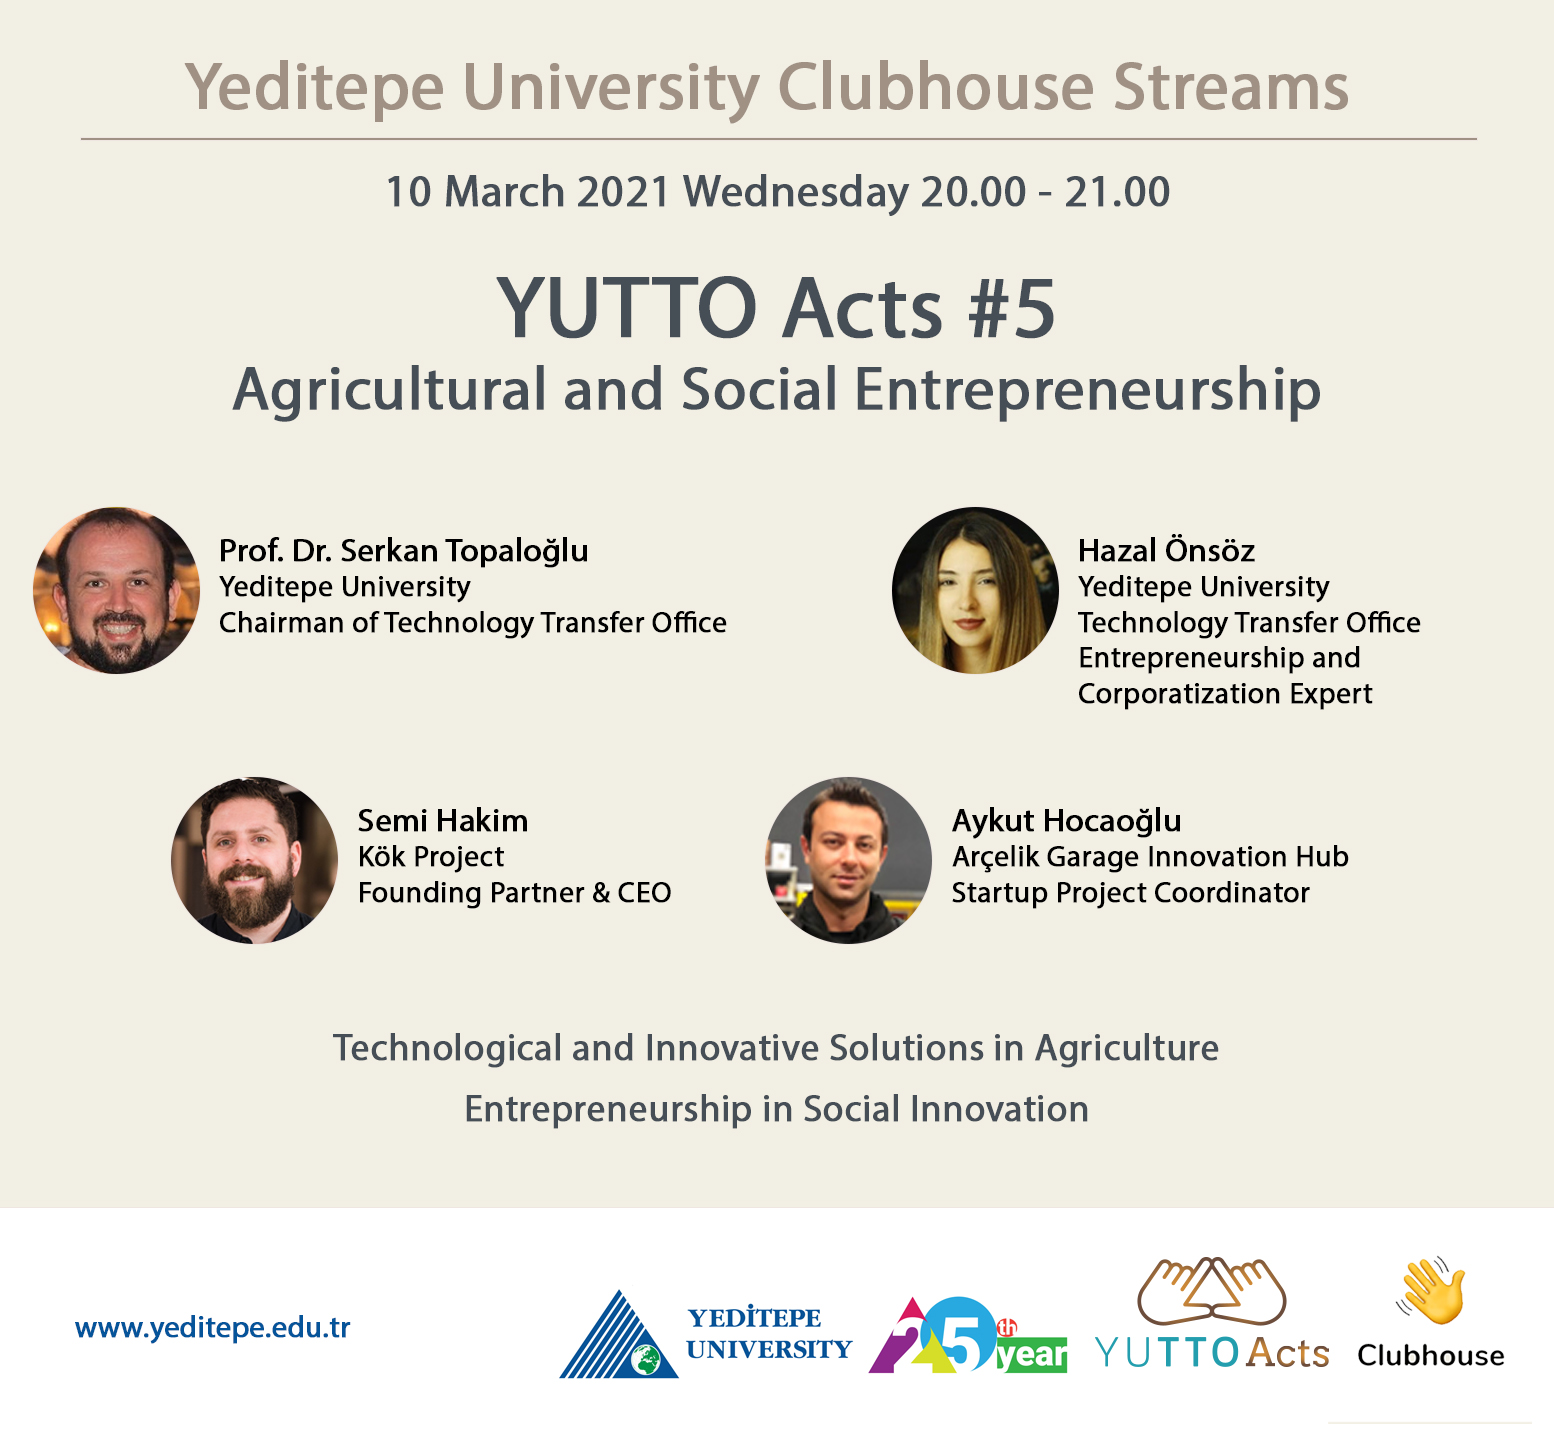 Yeditepe University Clubhouse Streams | YUTTO Acts #5